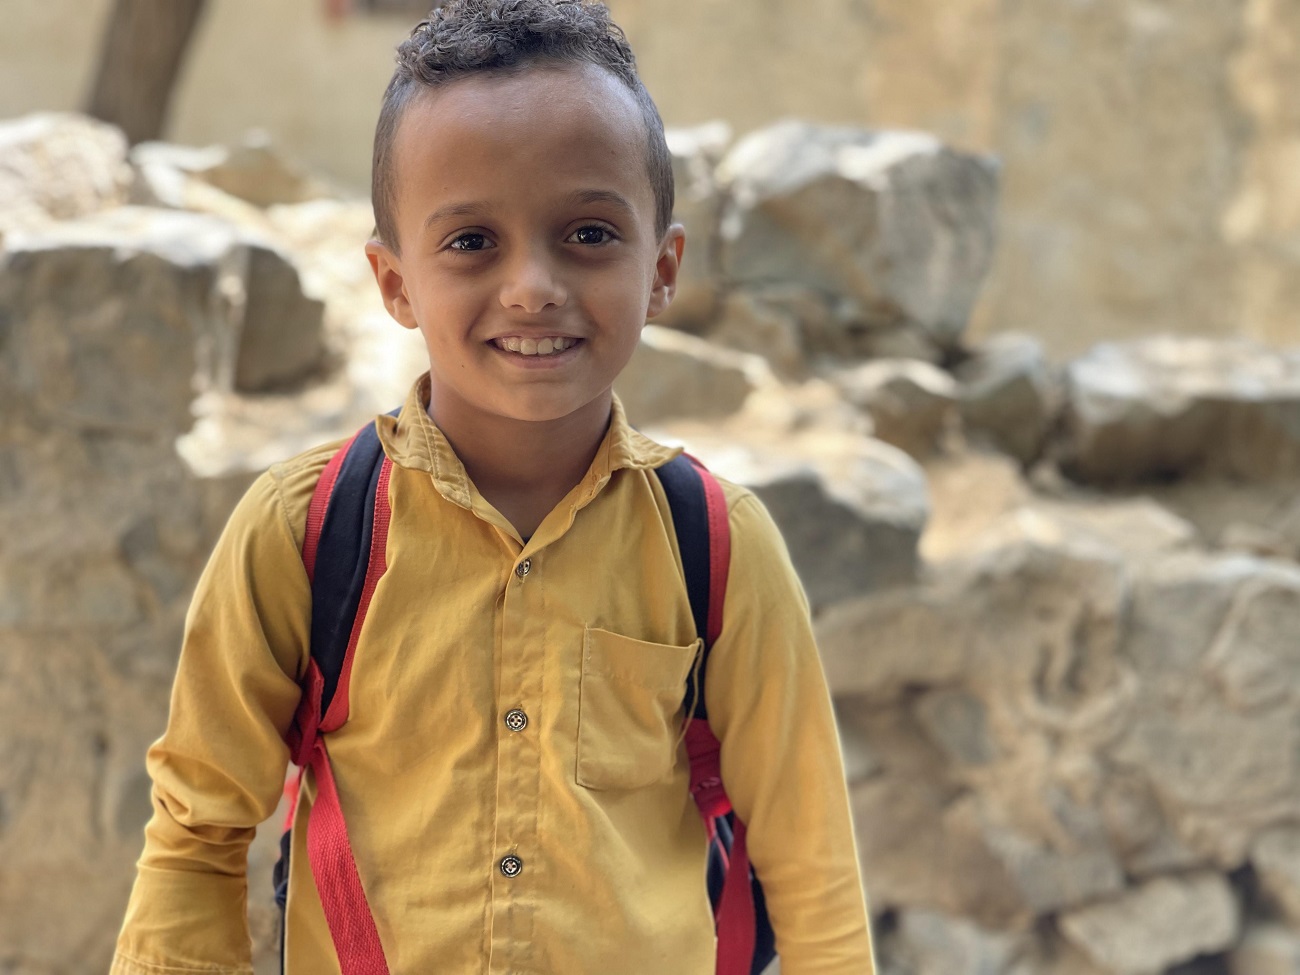 A young boy smiling and wearing a backpack